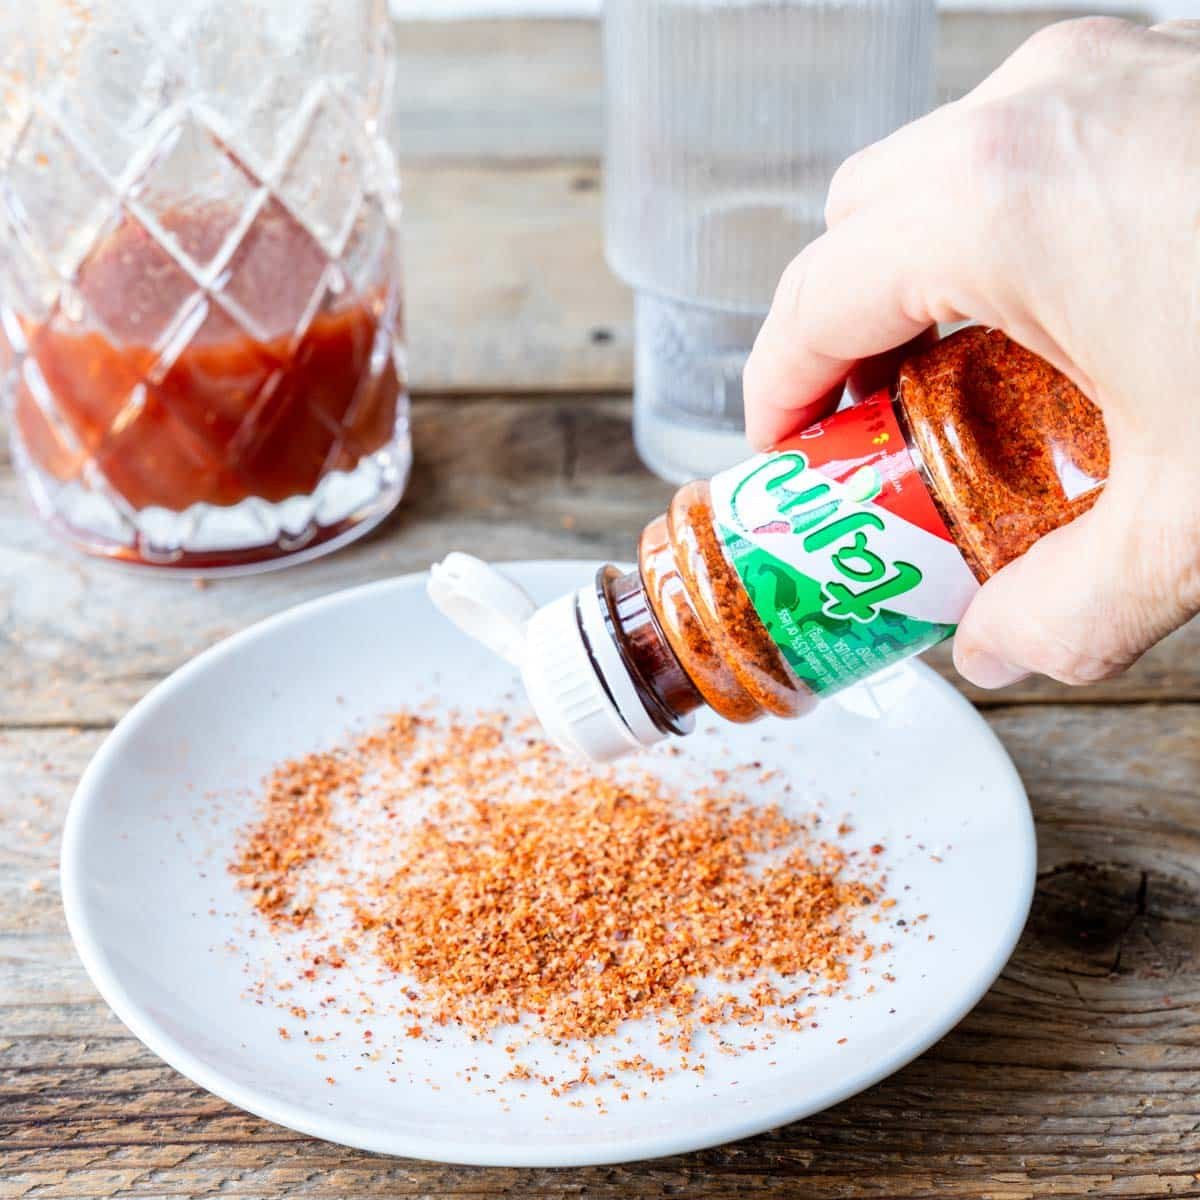 Tajin being poured on a plate 